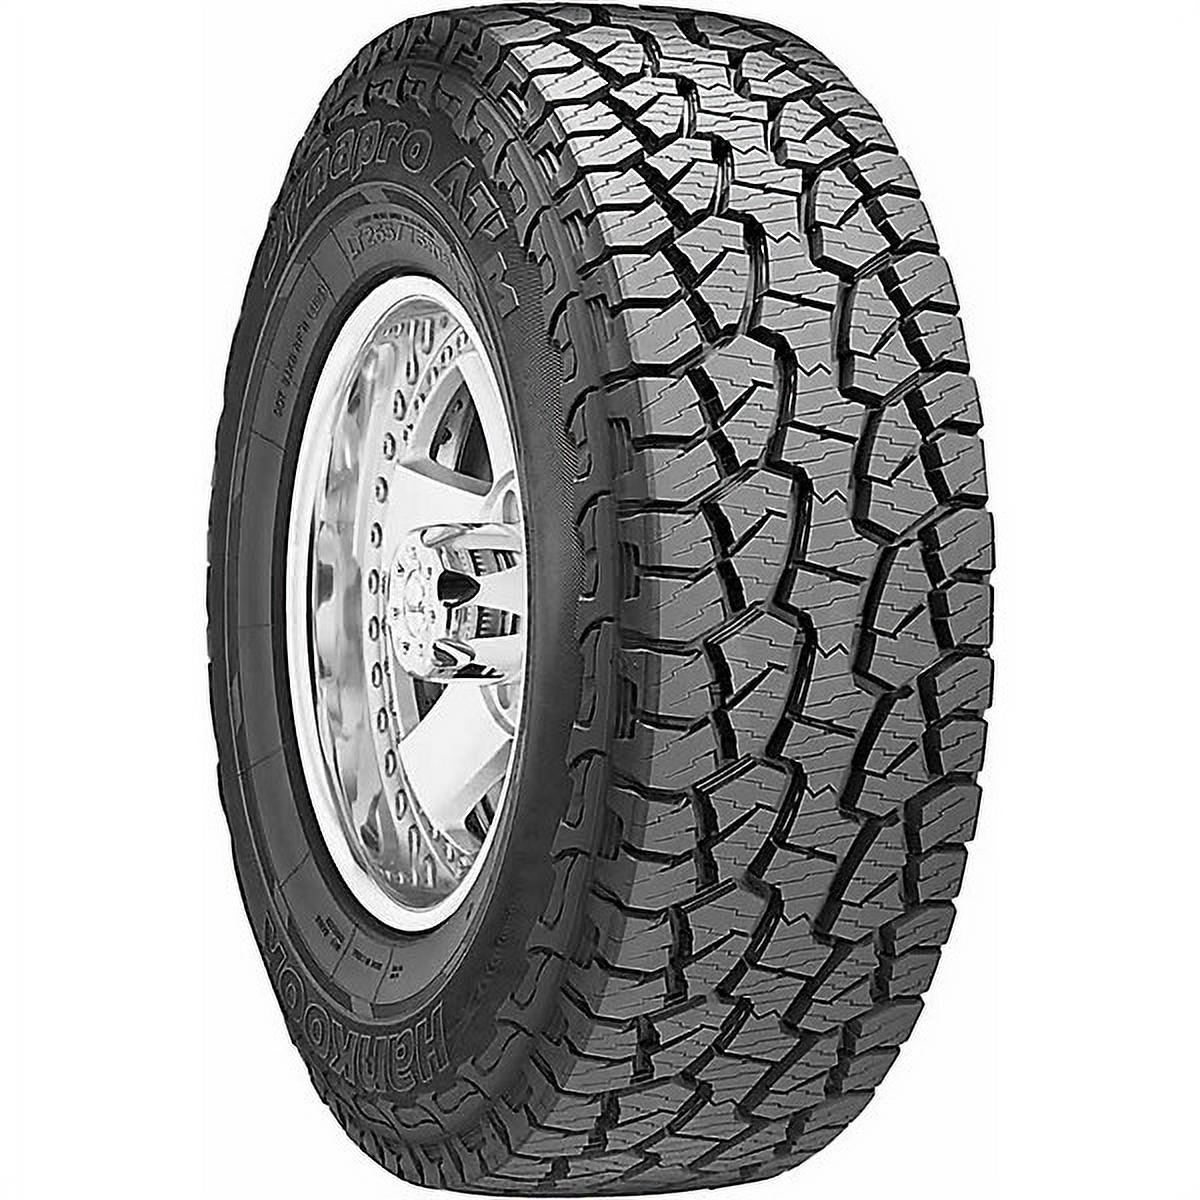 Hankook Dynapro ATM RF10 All-Terrain Tire - LT315/70R17 LRD 8PLY Rated - image 1 of 3